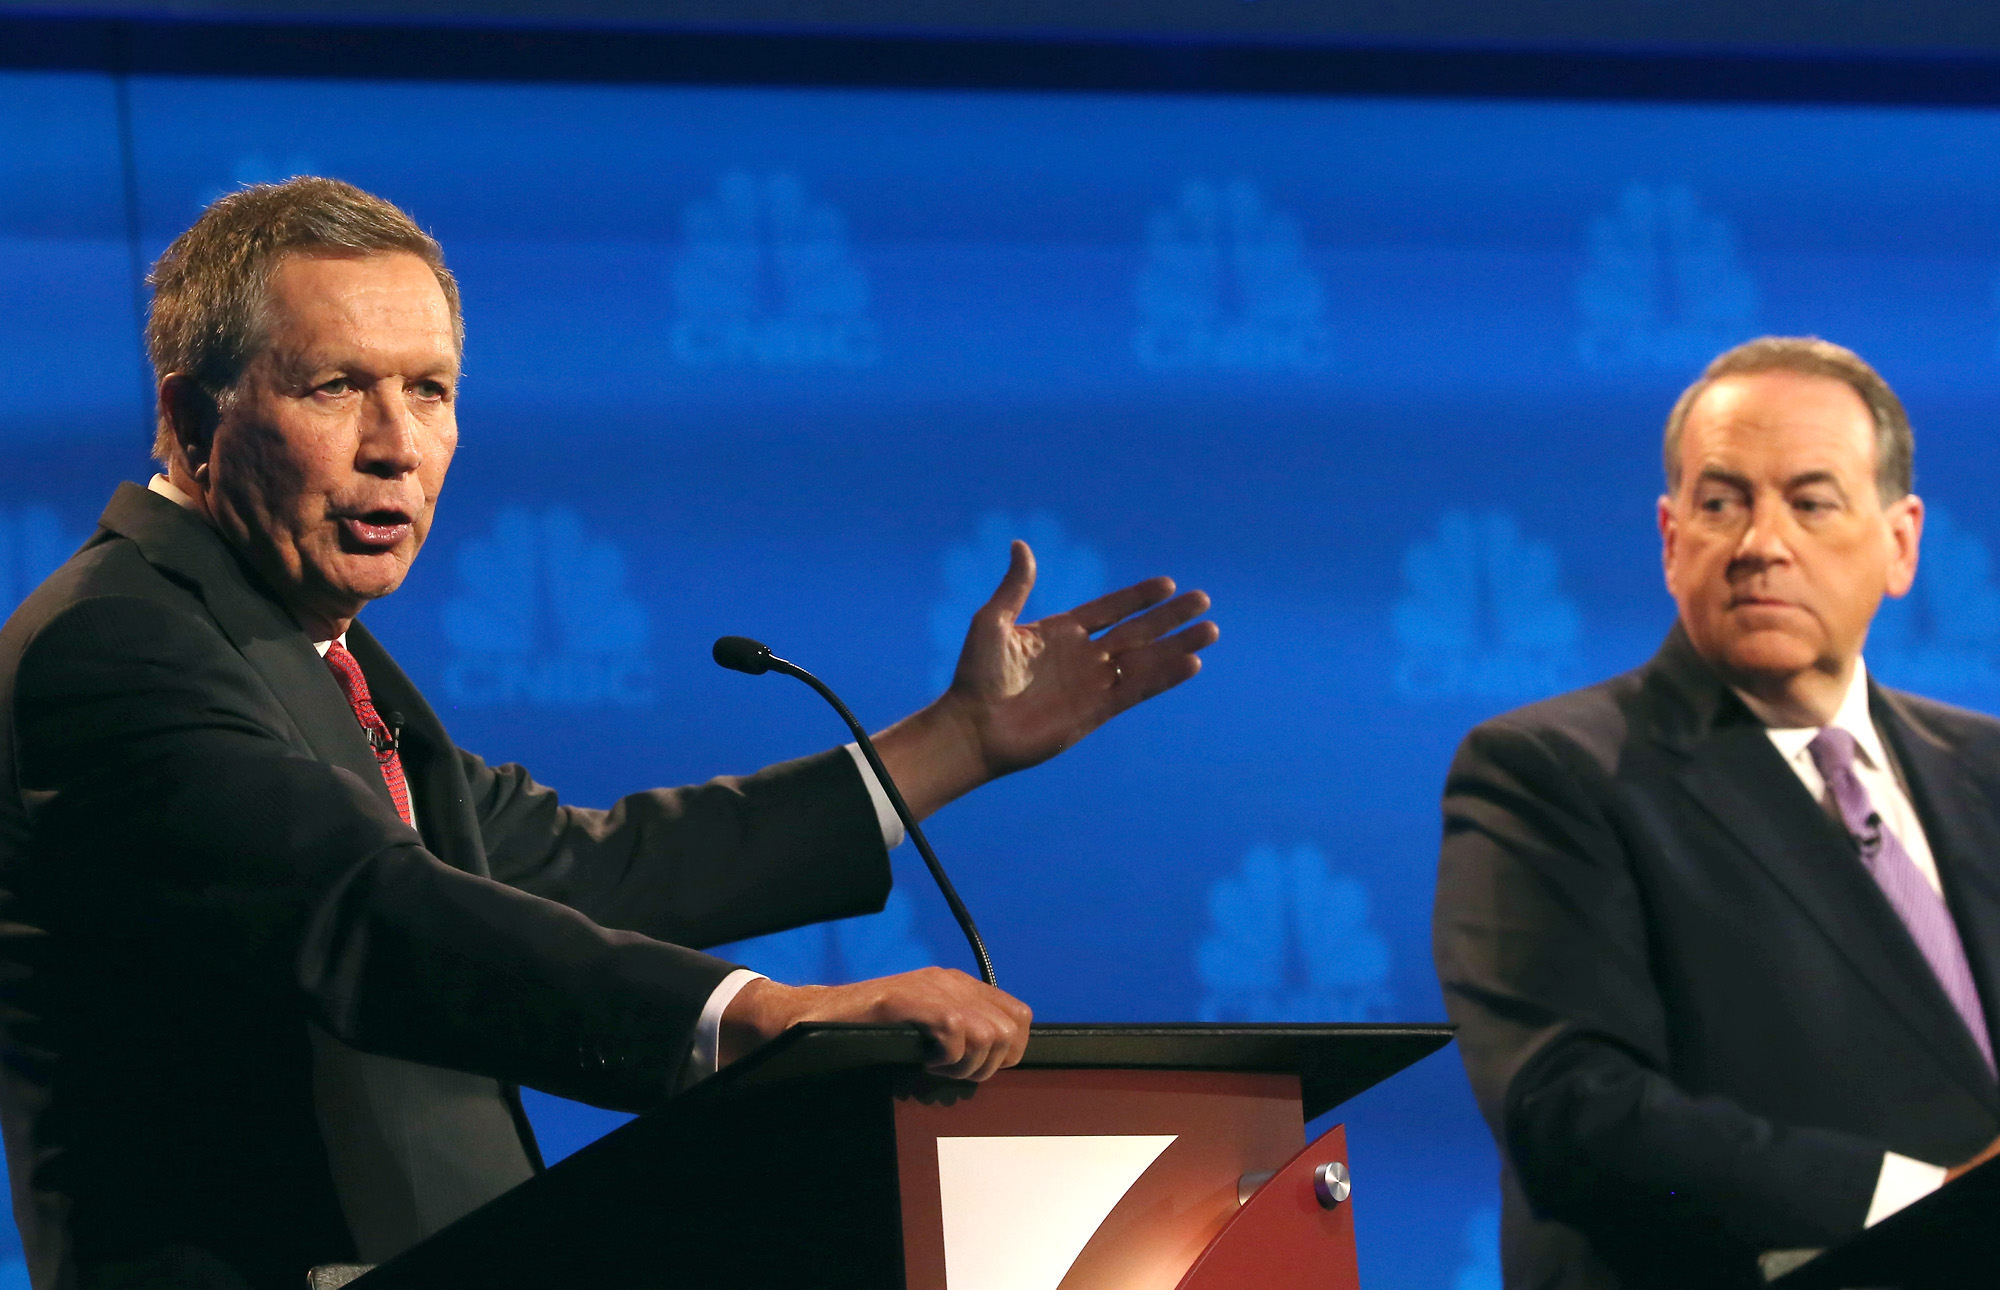 BOULDER, CO - OCTOBER 28: Presidential candidates Ohio Governor John Kasich (L-R) speaks while Mike Huckabee looks on during the CNBC Republican Presidential Debate at University of Colorados Coors Events Center October 28, 2015 in Boulder, Colorado. Fourteen Republican presidential candidates are participating in the third set of Republican presidential debates. (Photo by Justin Sullivan/Getty Images)